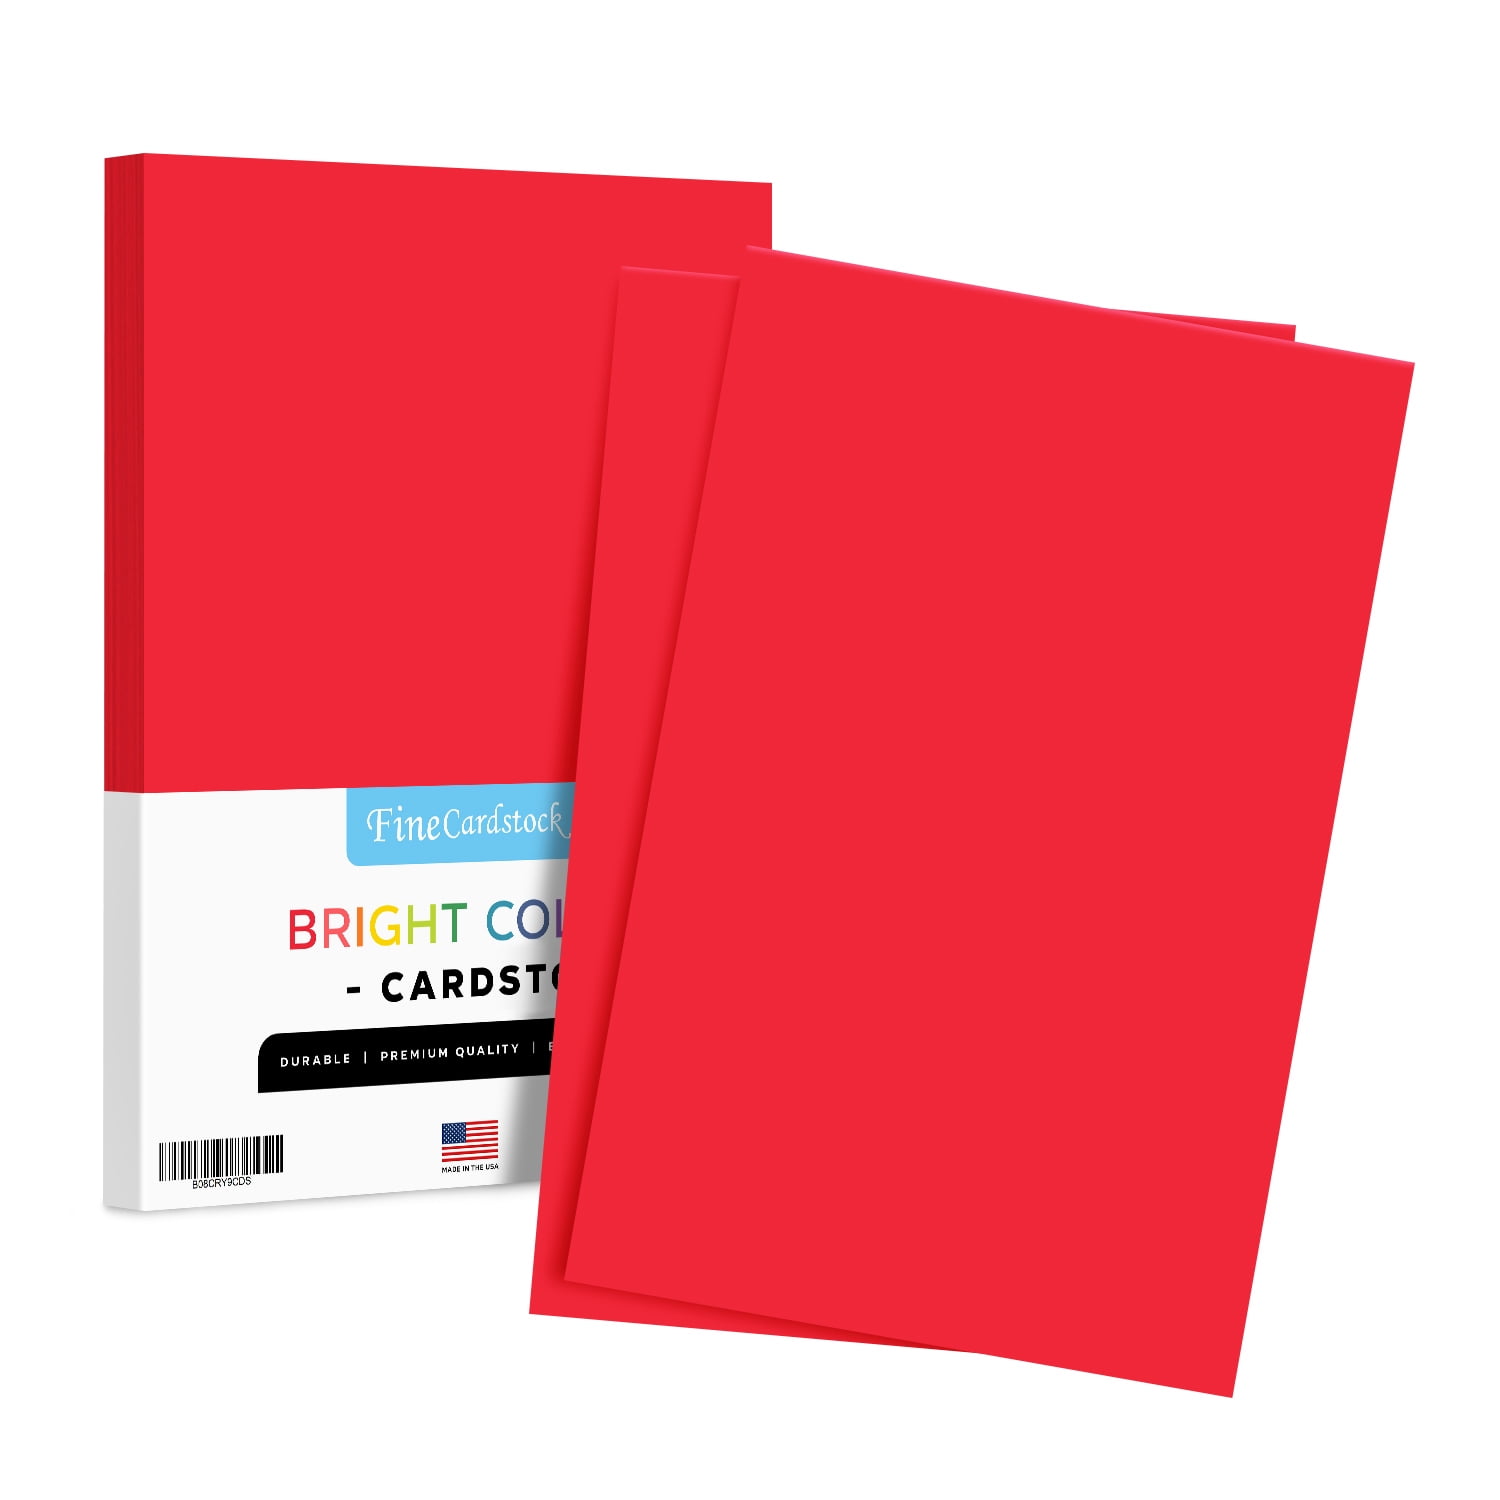 Neenah Astrobrights Premium Colored Card Stock Paper